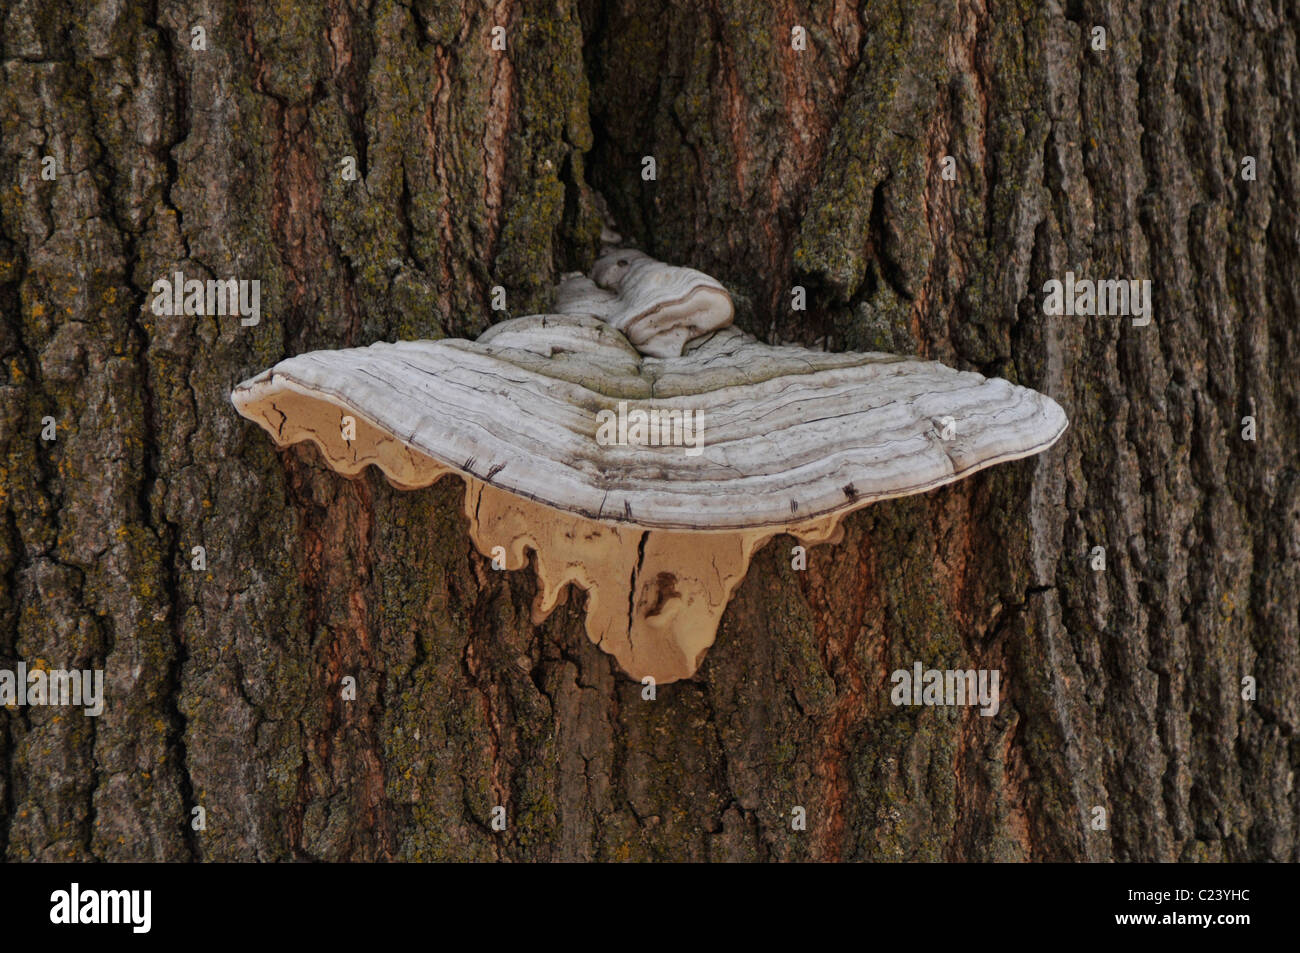 Avery large mushroom growing from a truck of a maple tree. Stock Photo